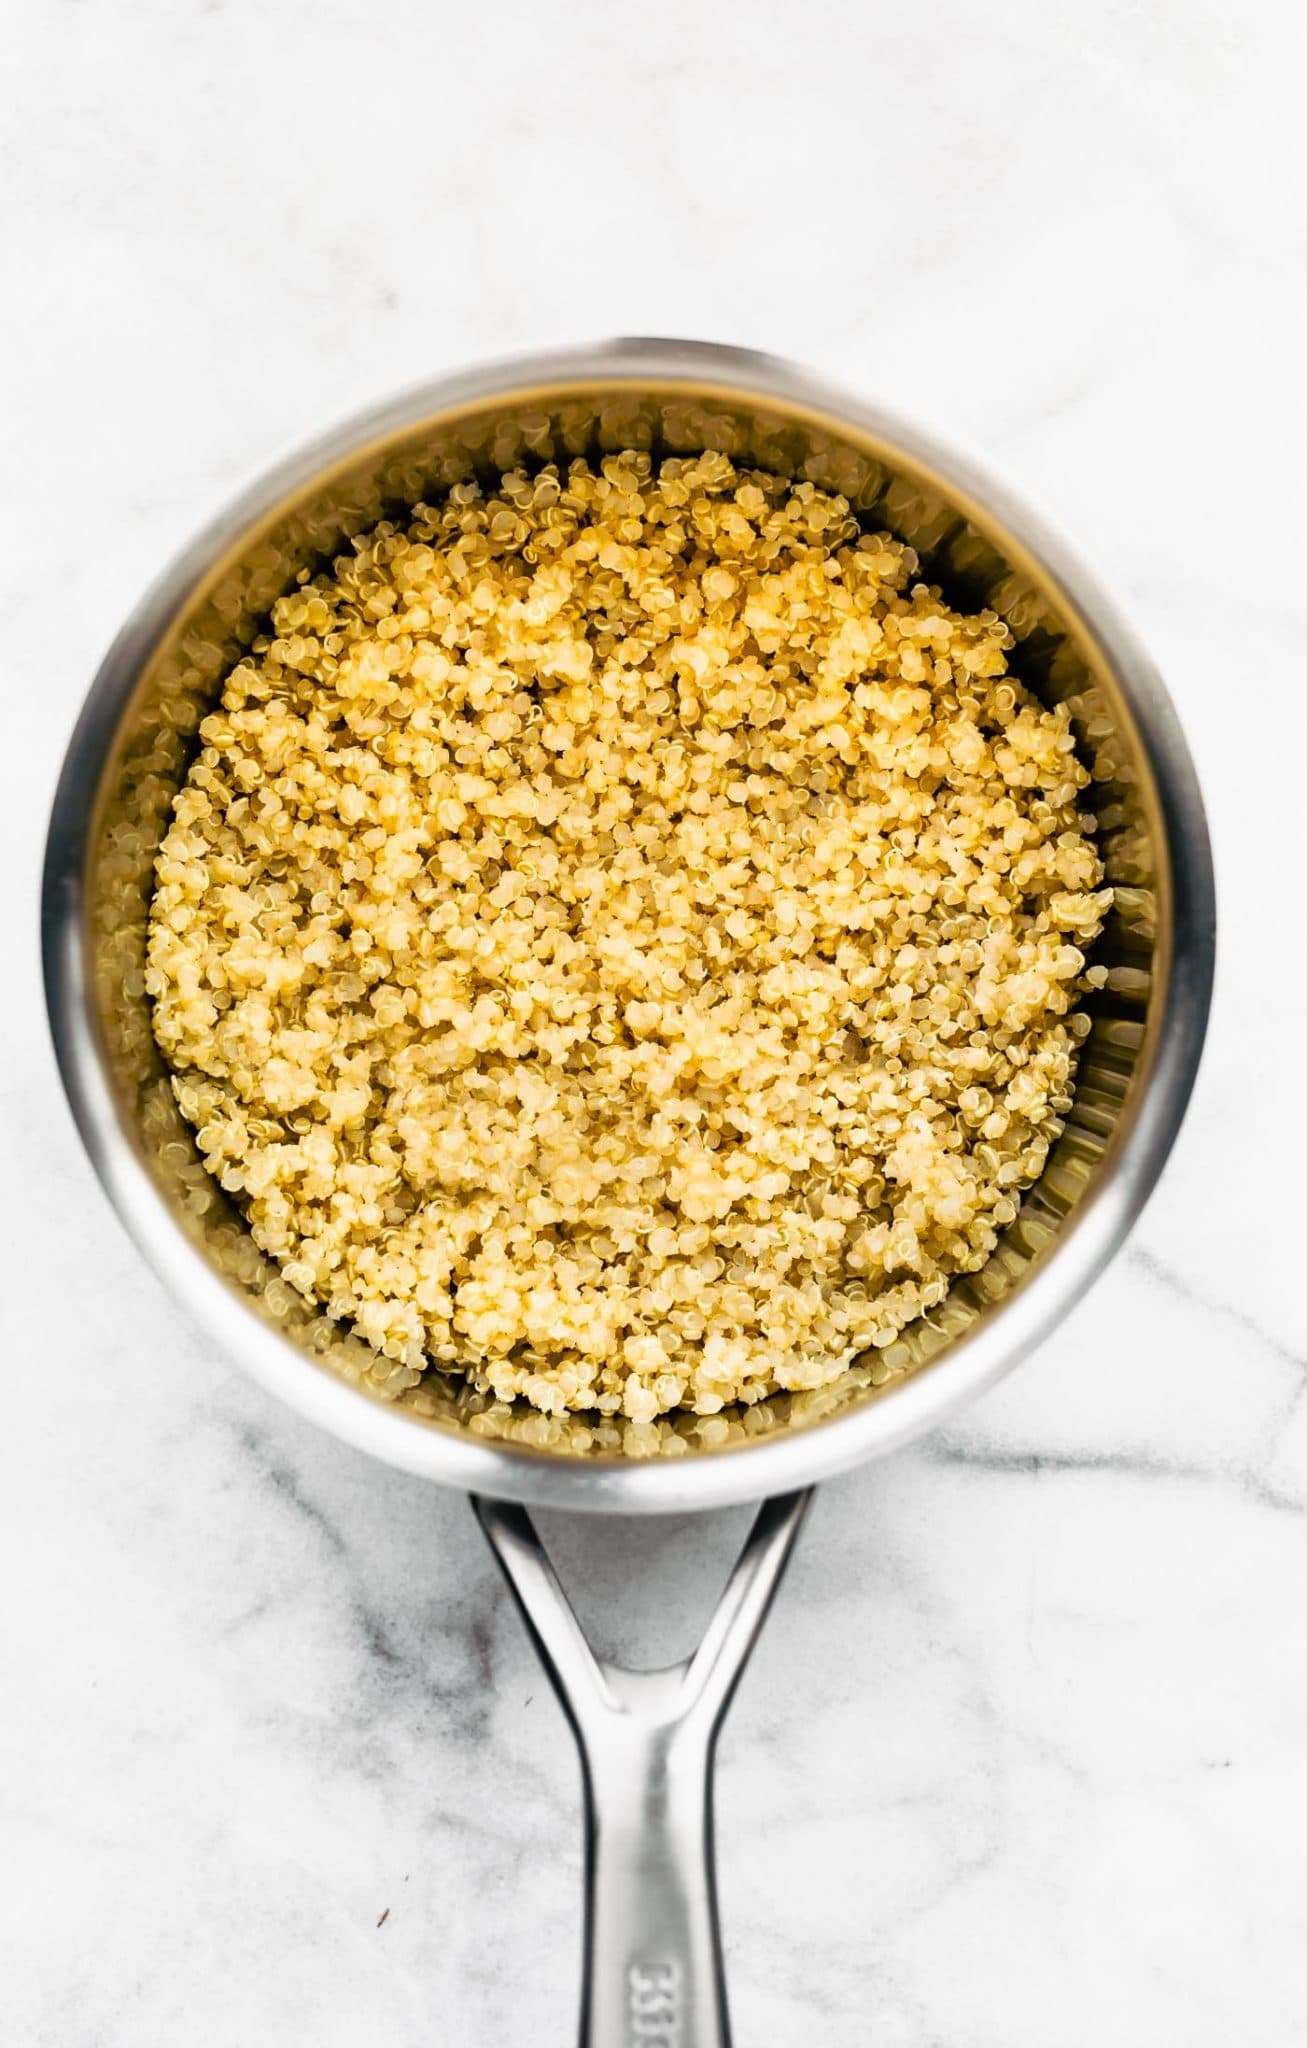 a sauce pan full of cooked gluten free quinoa grains